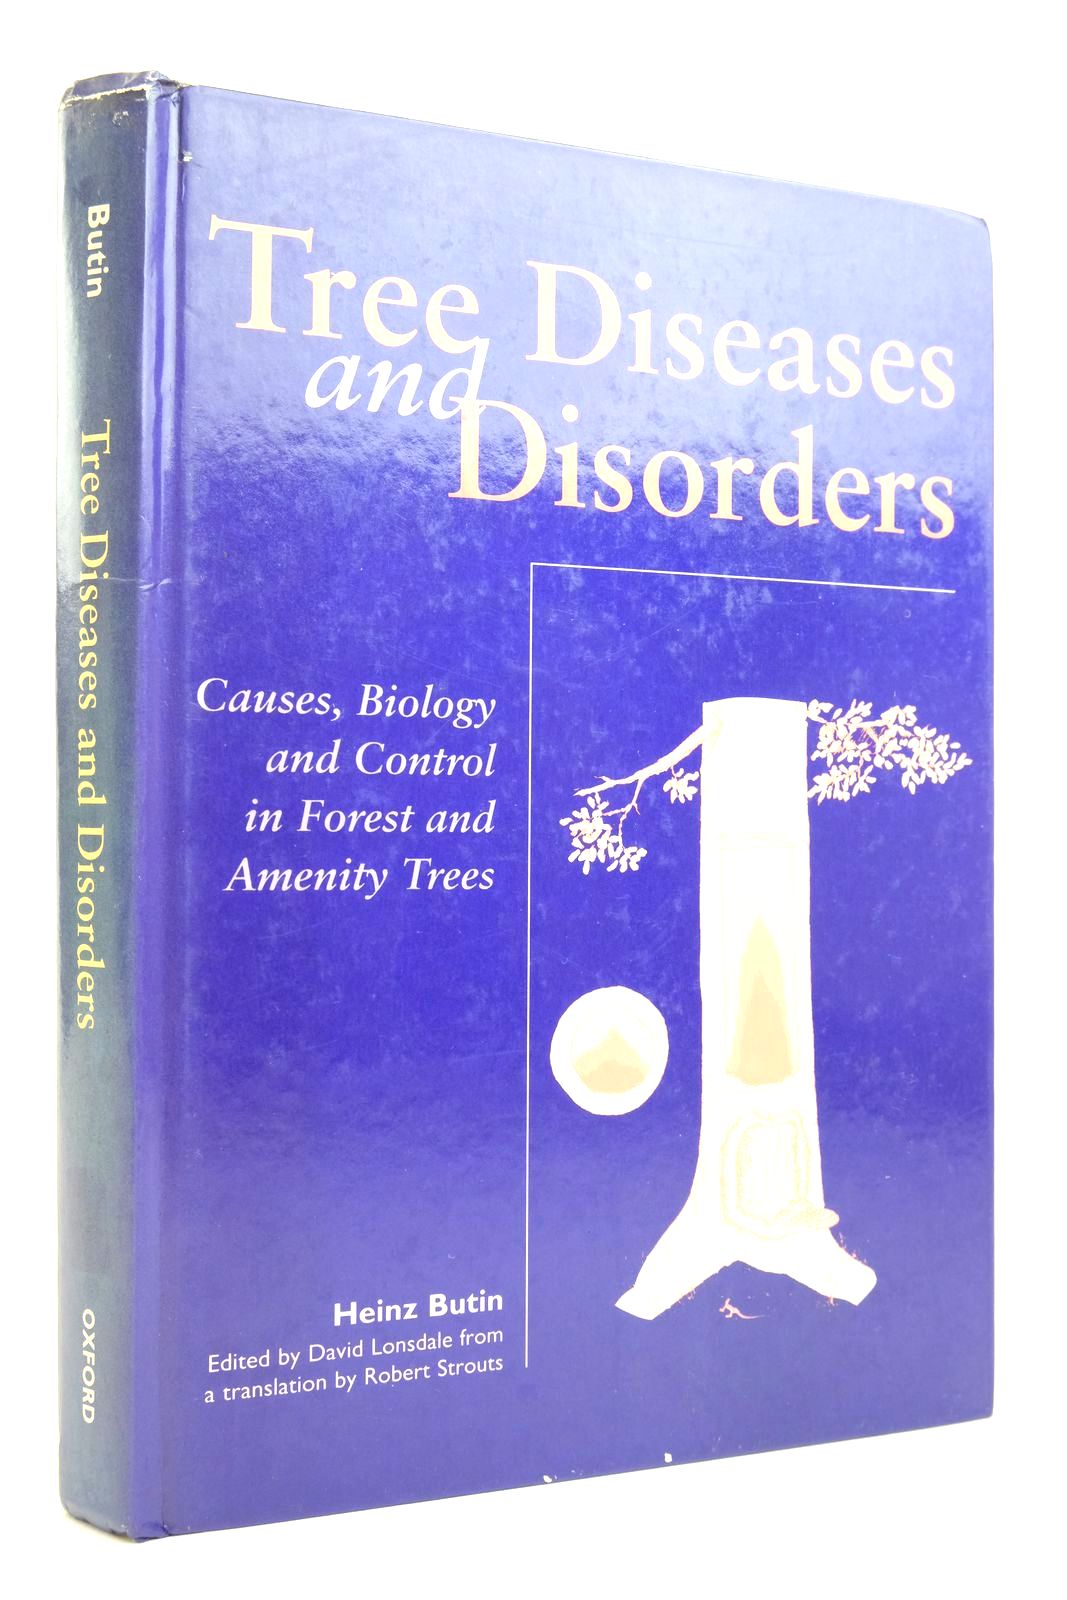 TREE DISEASES AND DISORDERS: CAUSES, BIOLOGY, AND CONTROL IN FOREST AND AMENITY TREES - Butin, Heinz & Lonsdale, David